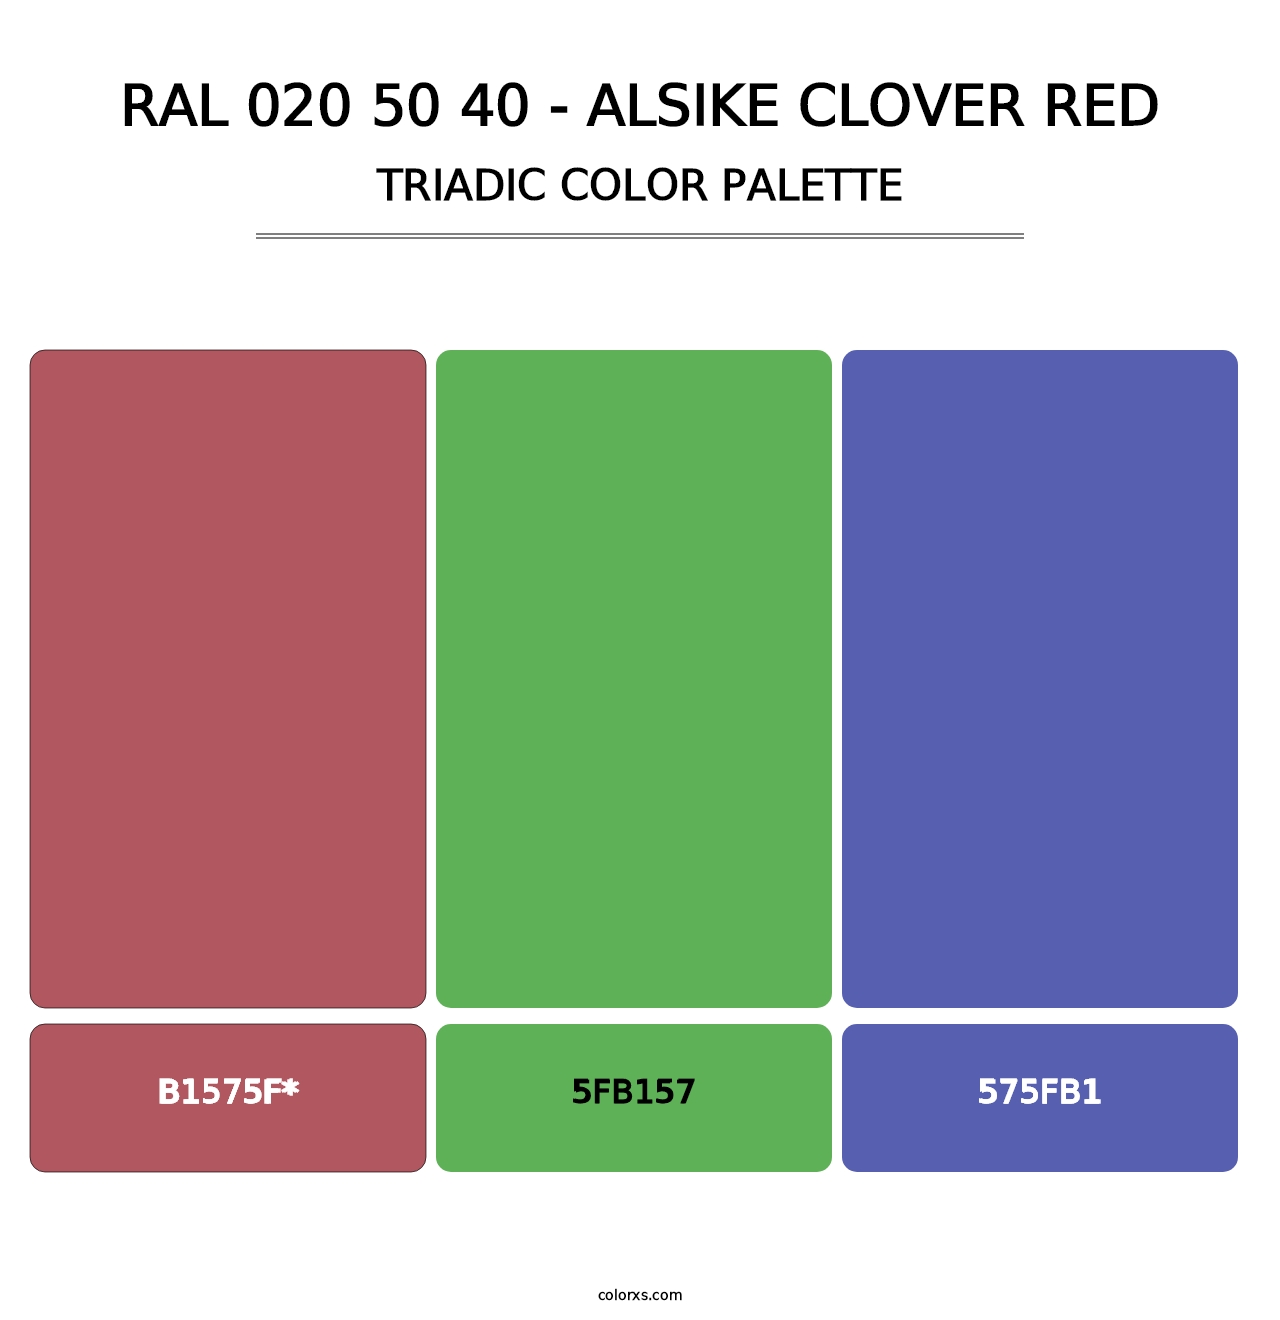 RAL 020 50 40 - Alsike Clover Red - Triadic Color Palette